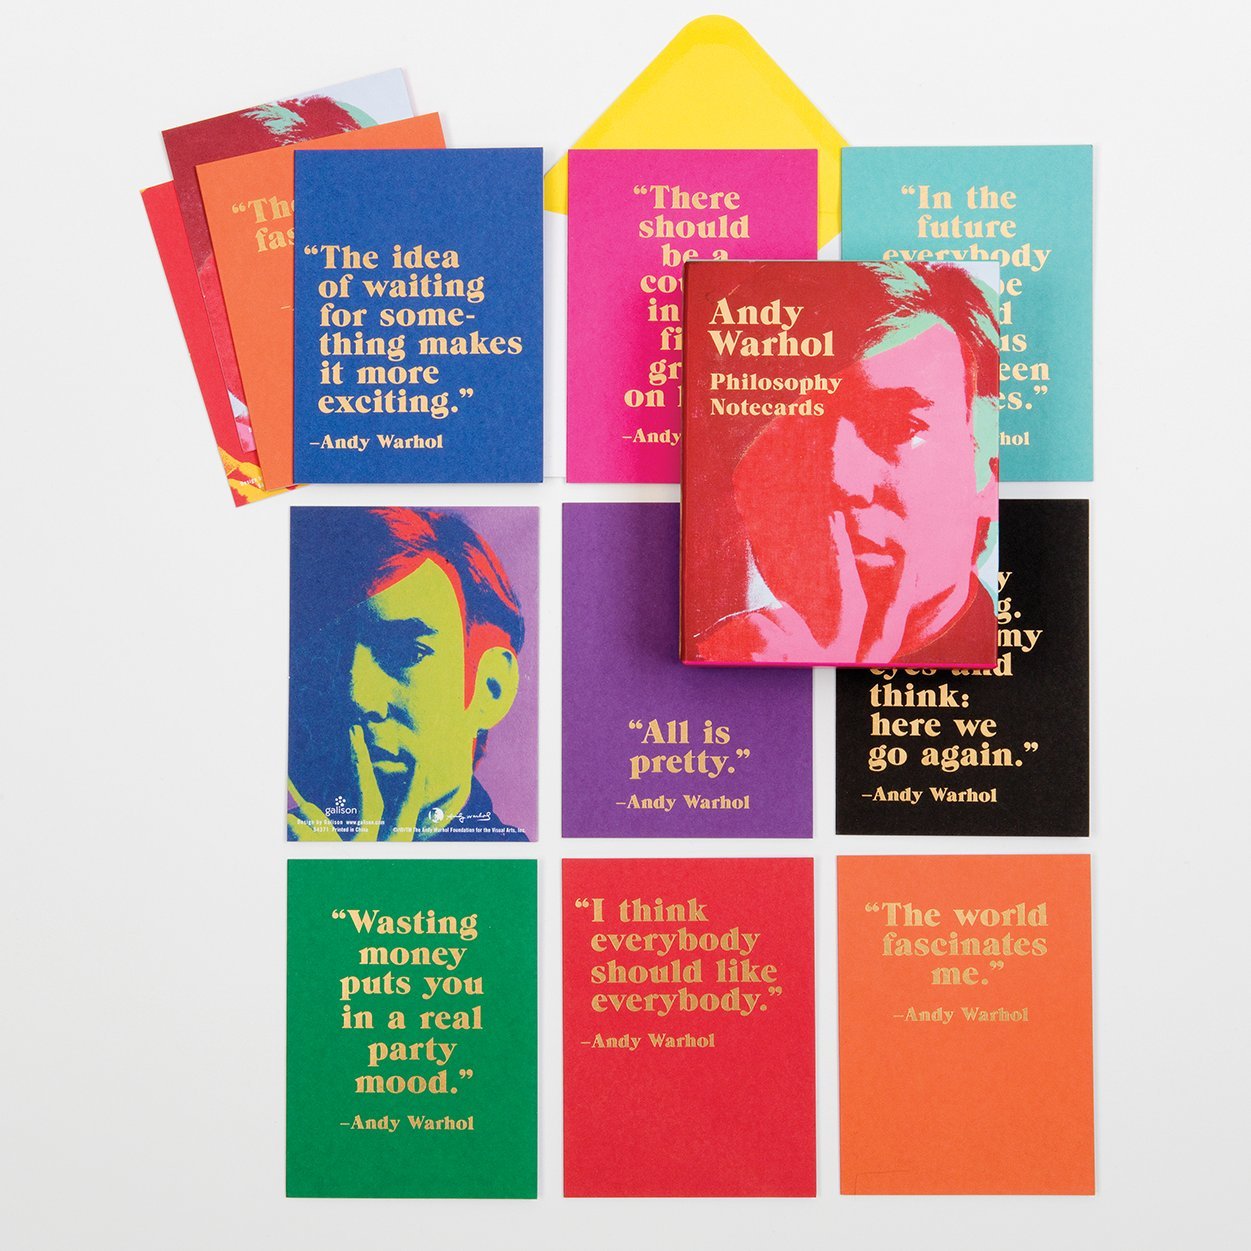 ANDY WARHOL PHILOSOPHY NOTECARDS